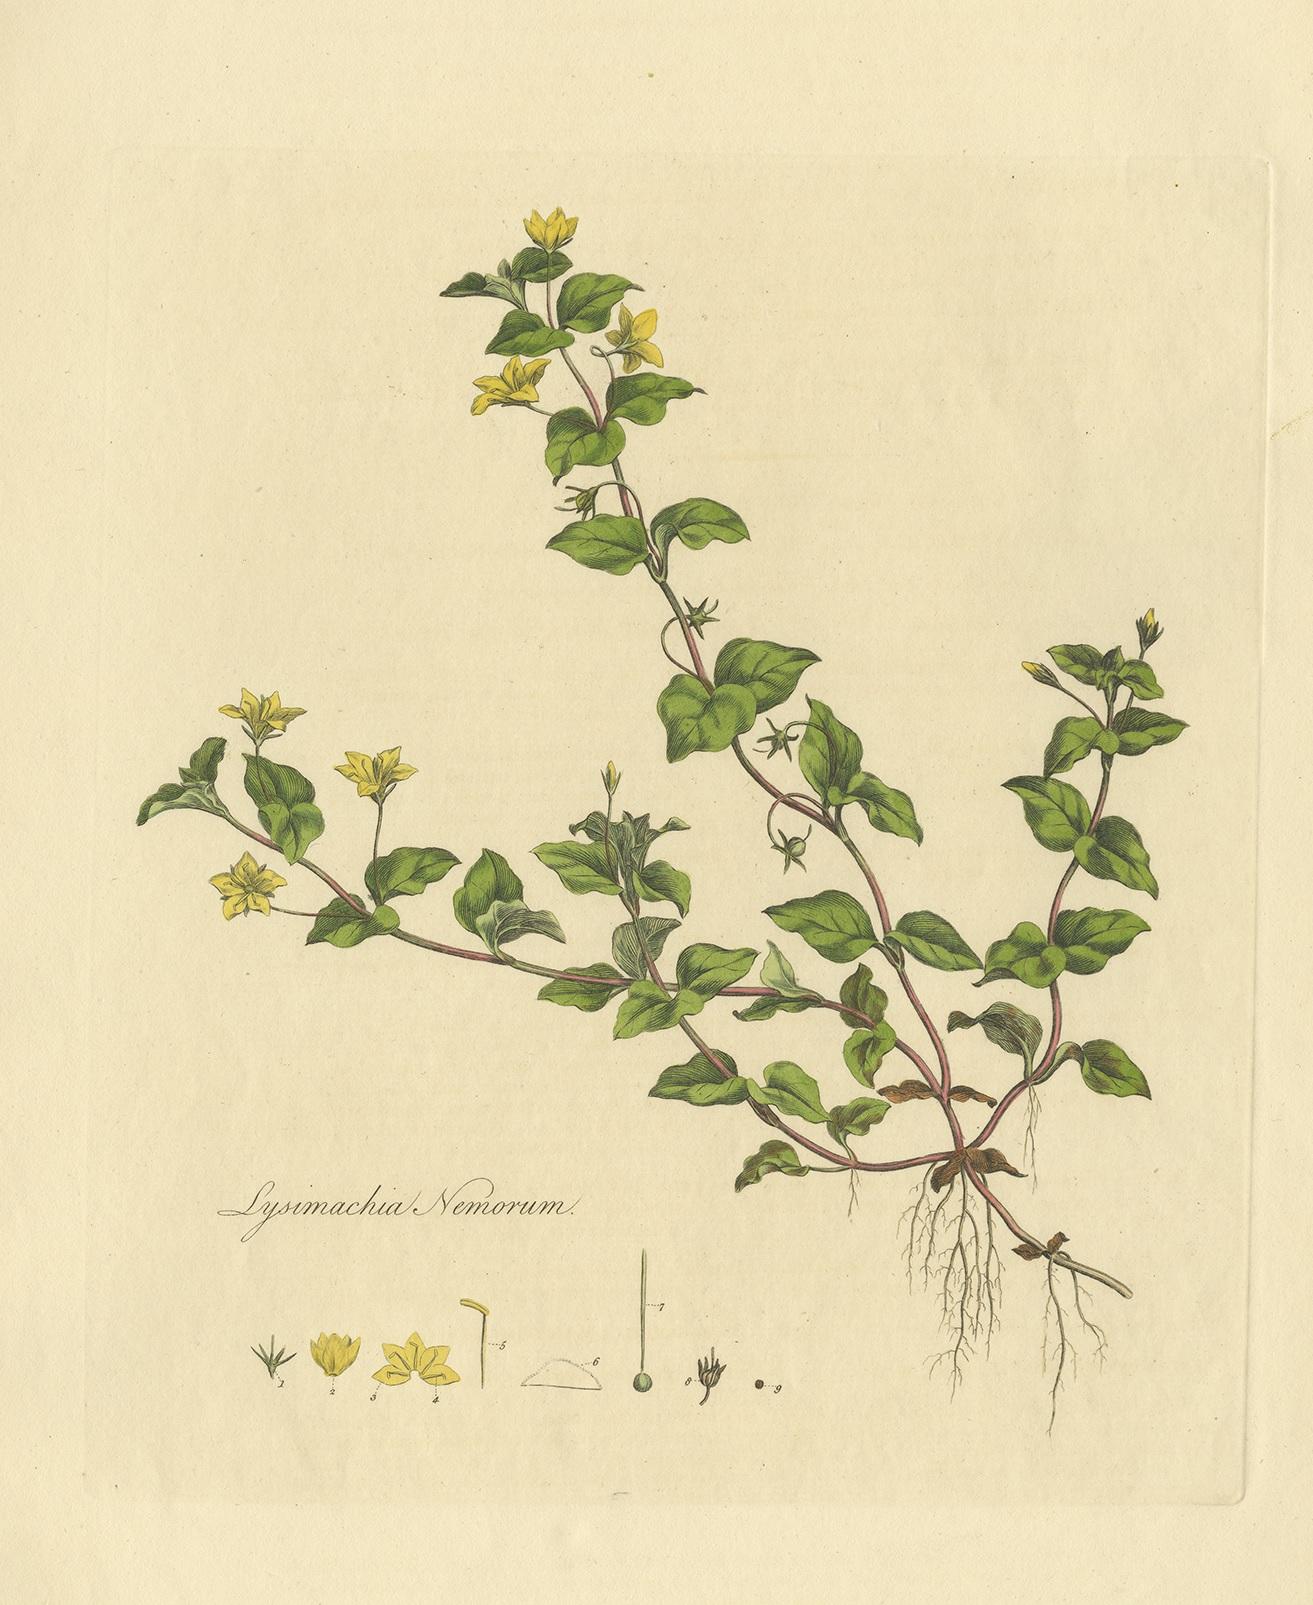 Antique botany print titled 'Lysimachia Nemorum'. Hand colored engraving of lysimachia nemorum also known as the yellow pimpernel. This print originates from 'Flora Londinensis' by William Curtis.